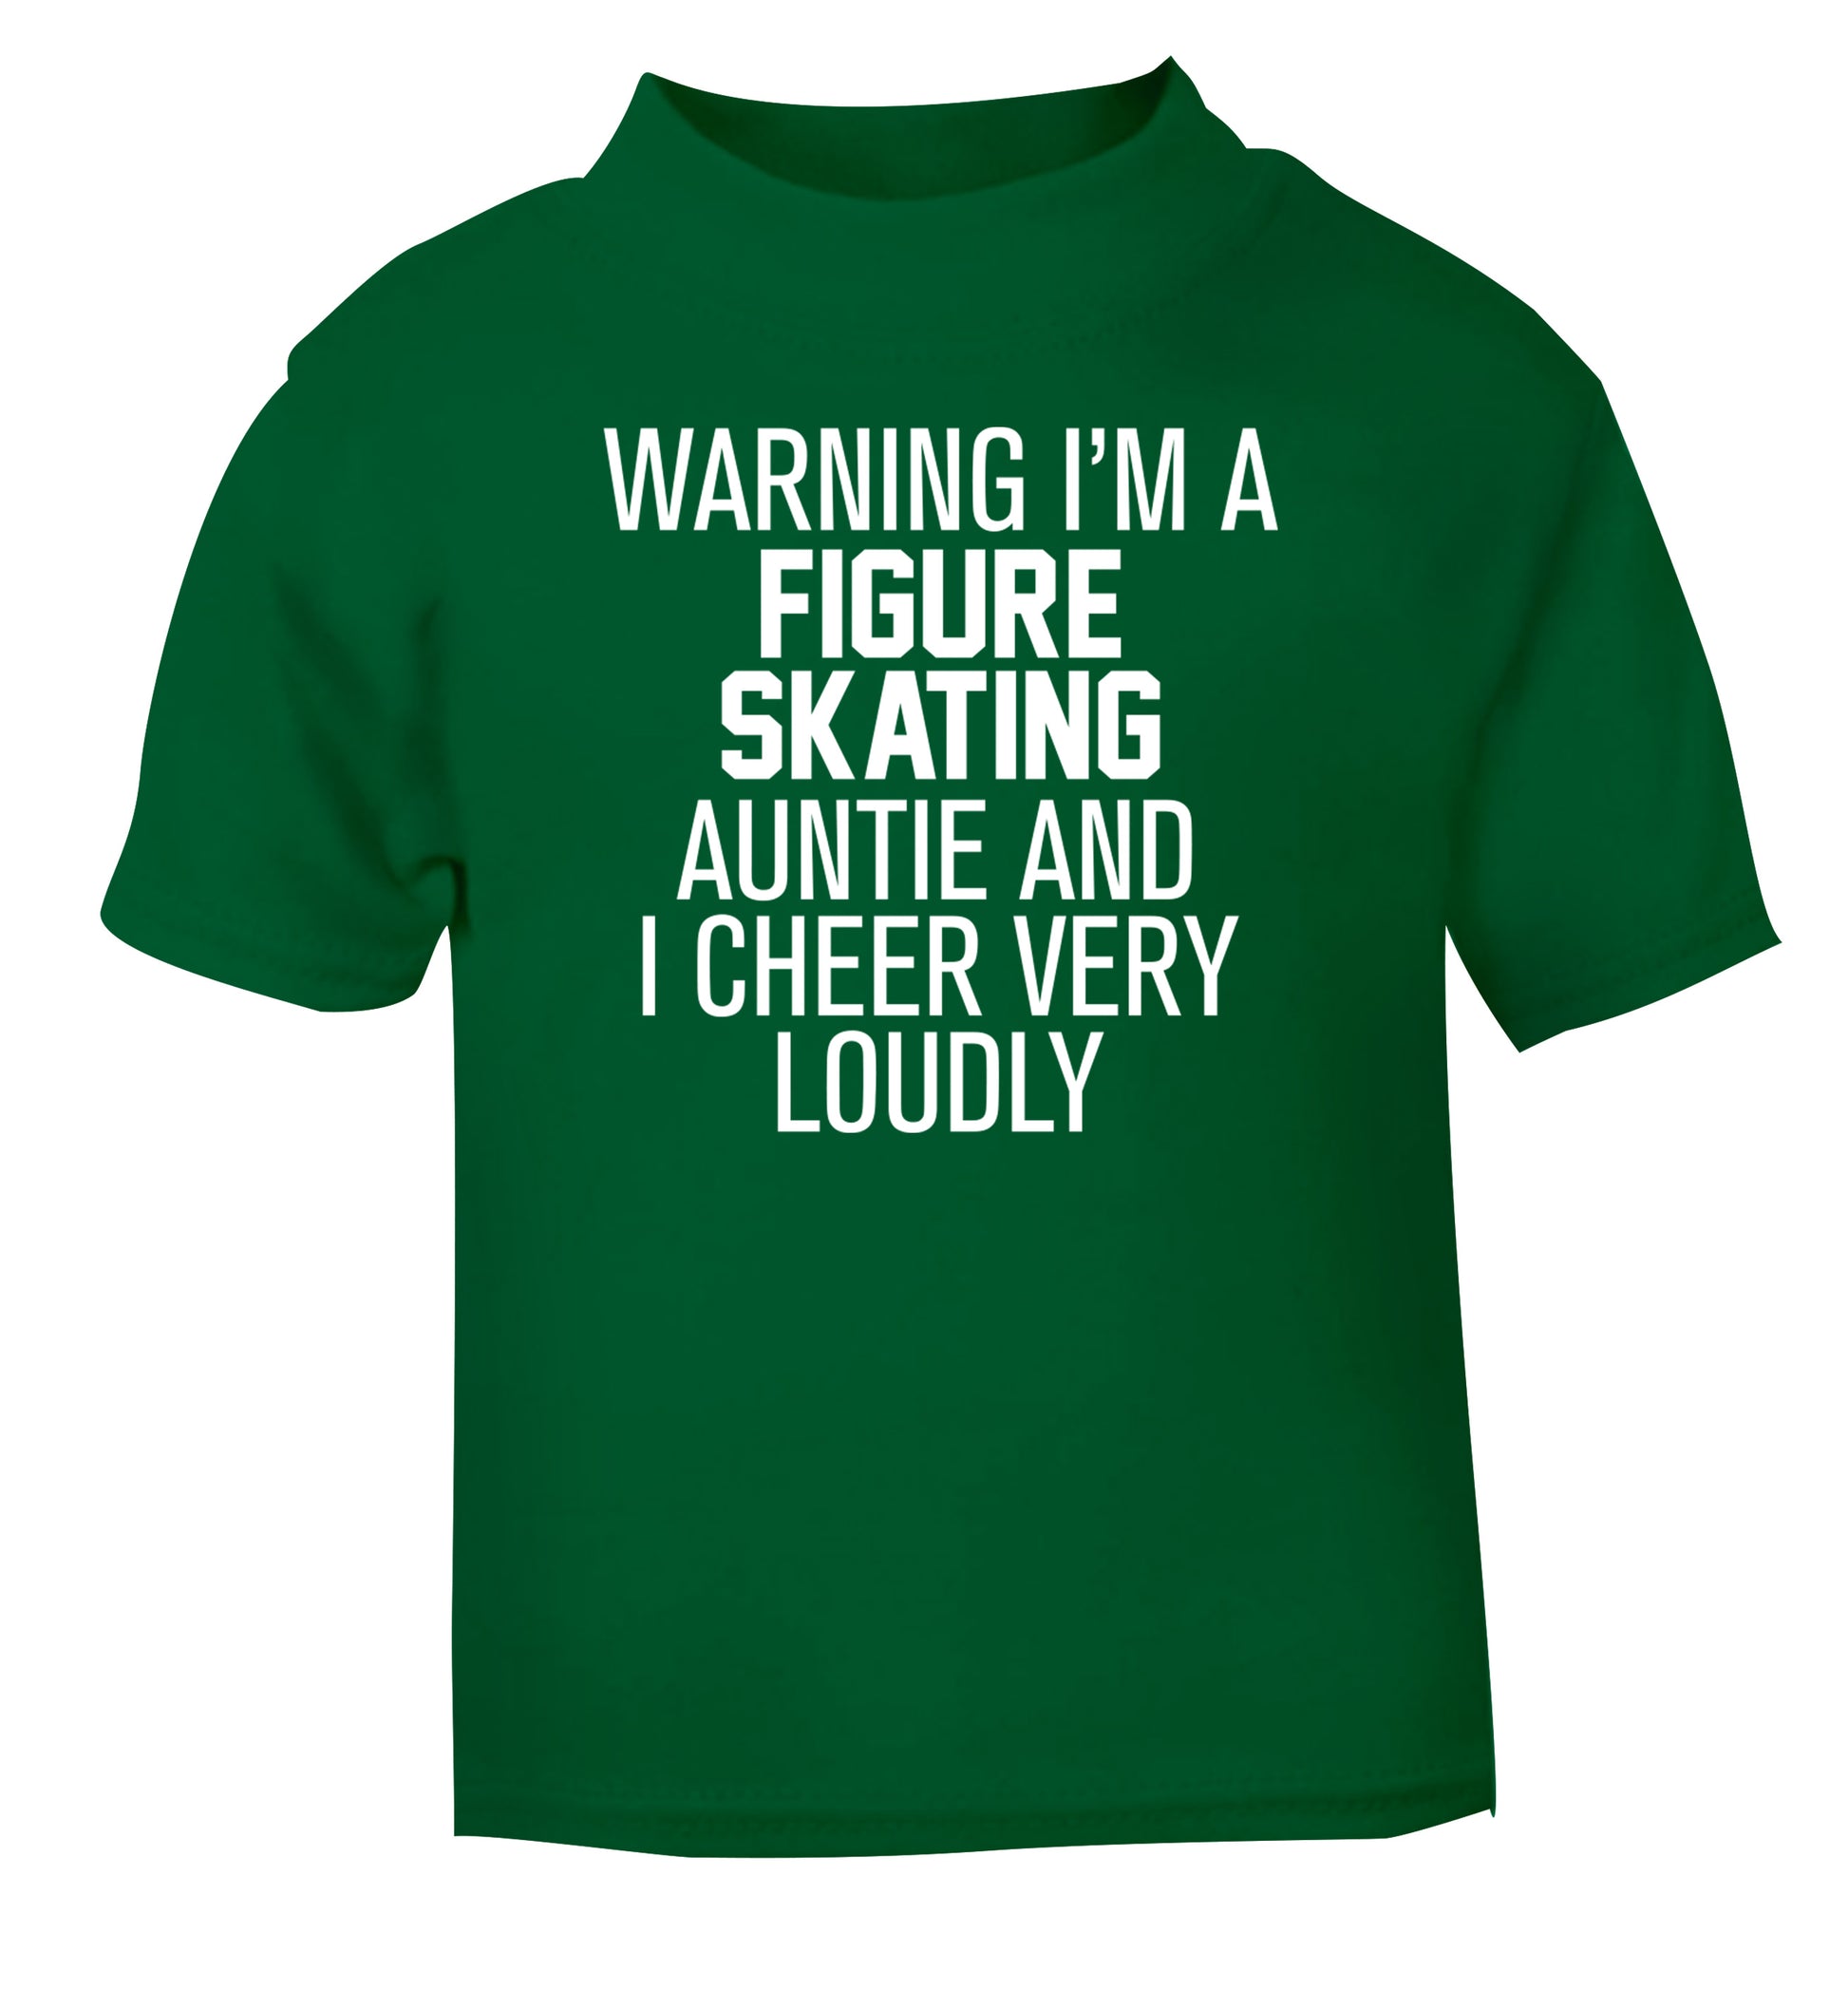 Warning I'm a figure skating auntie and I cheer very loudly green Baby Toddler Tshirt 2 Years